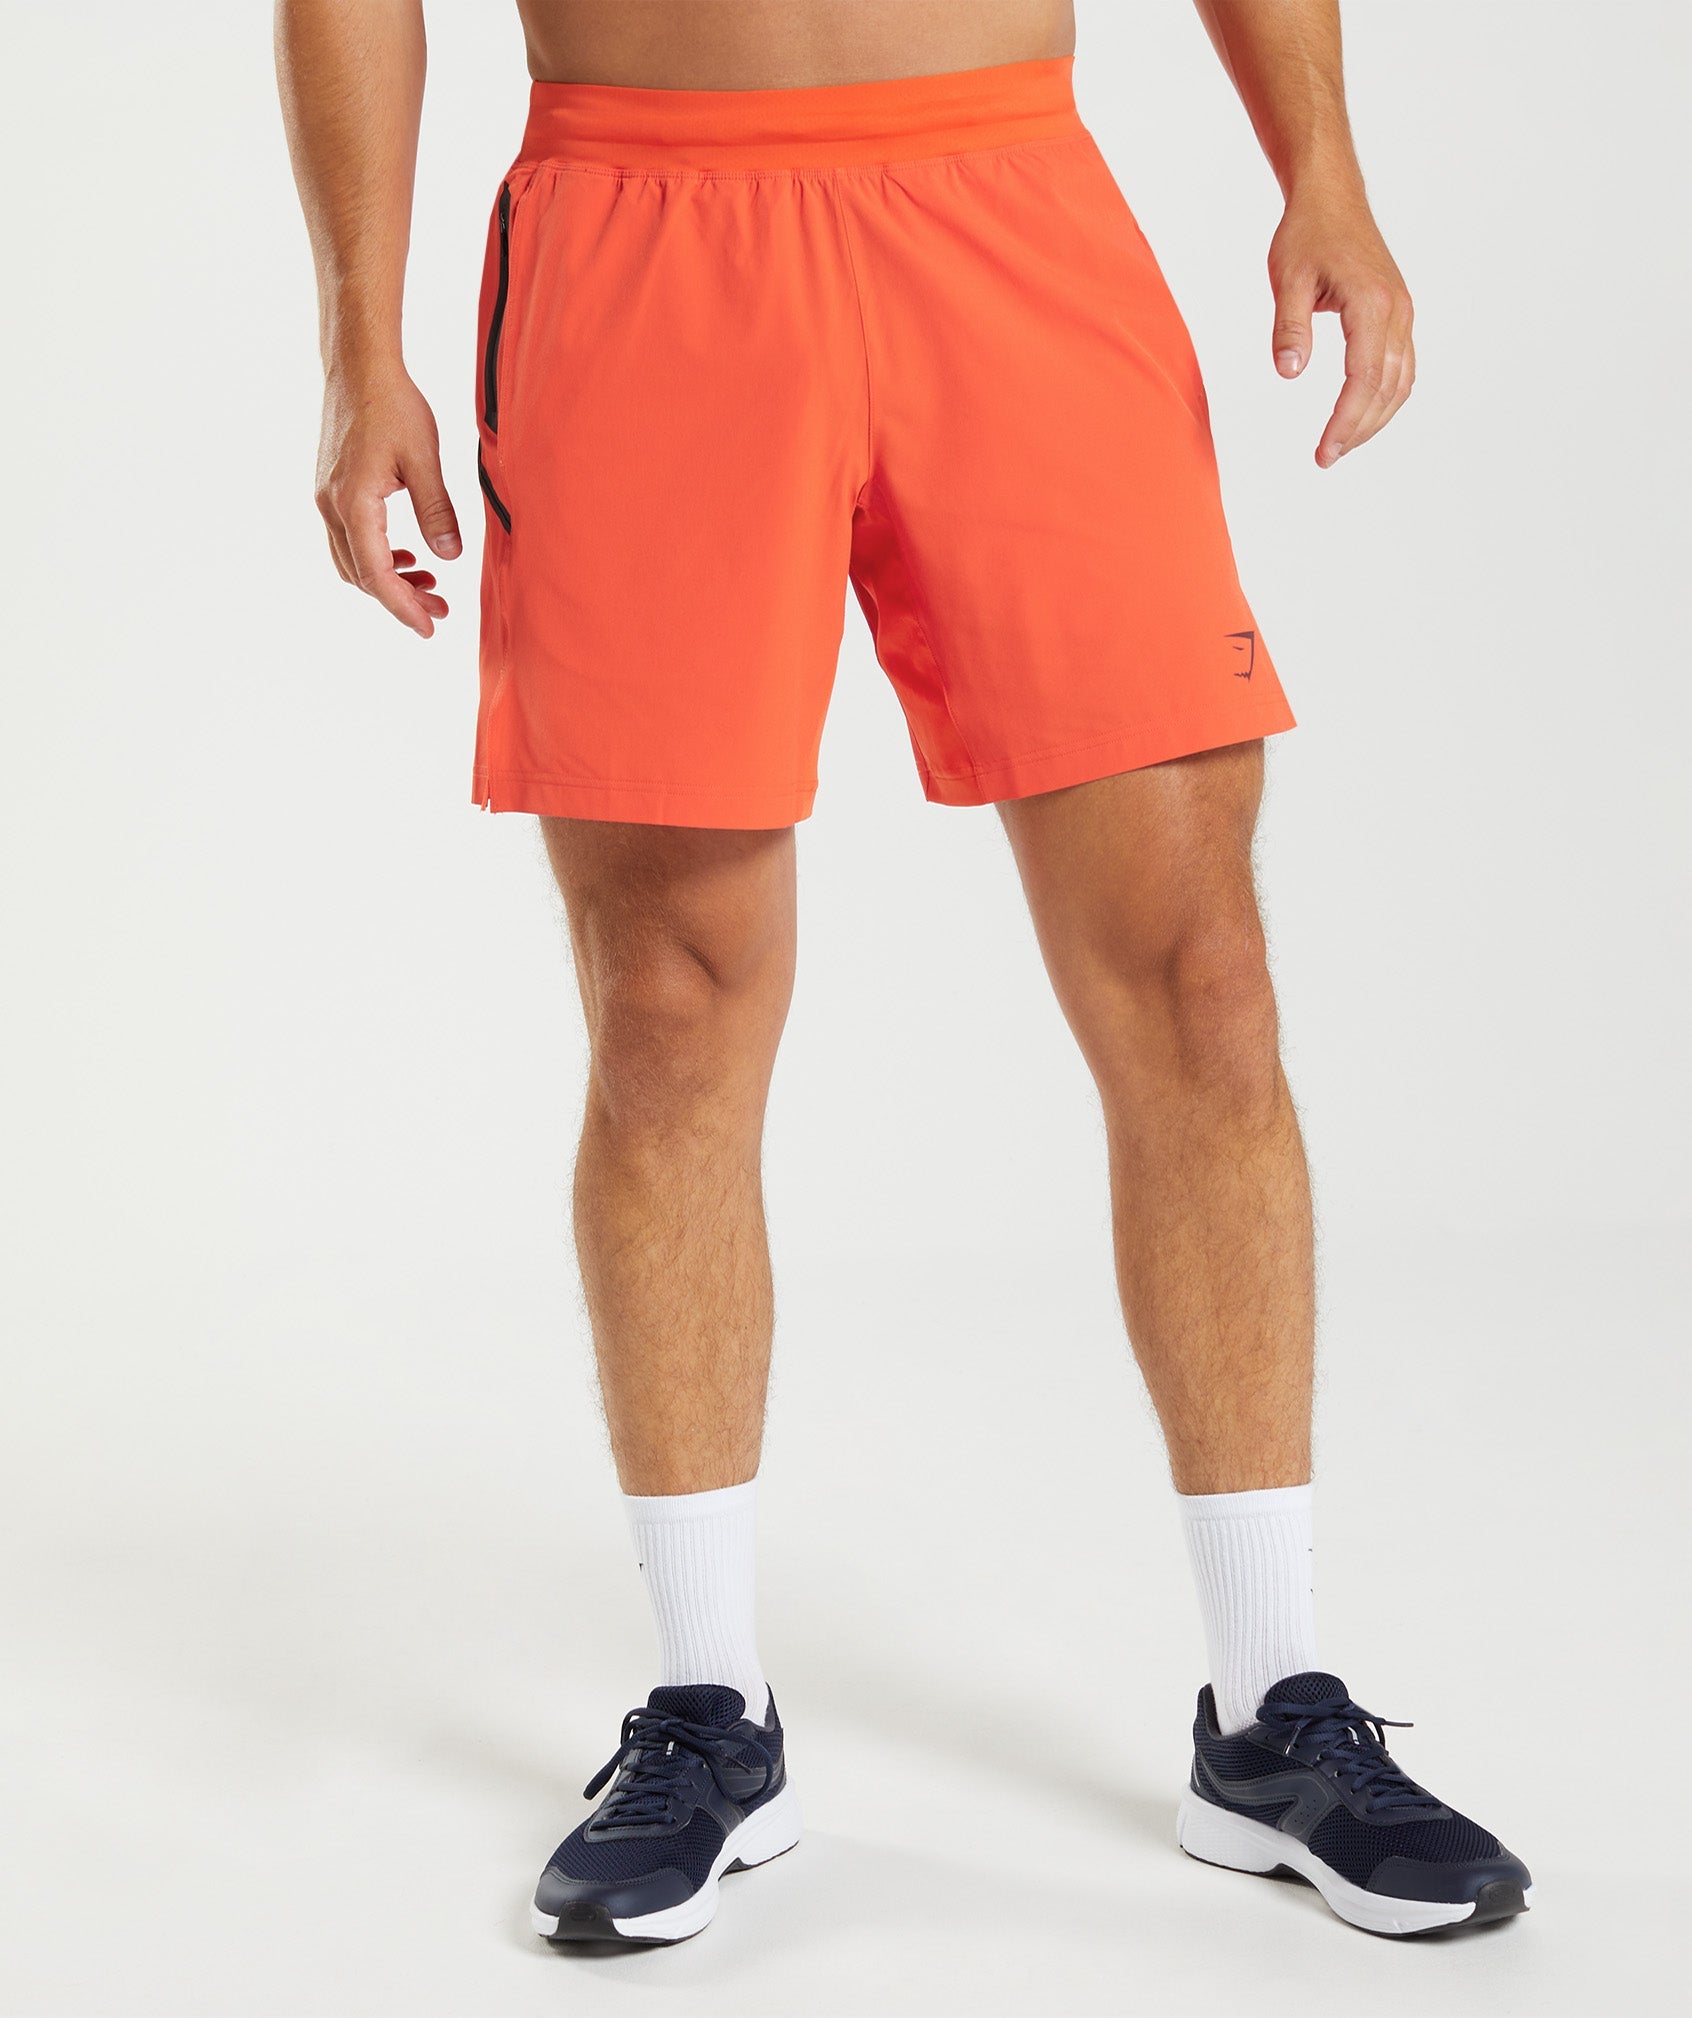 Apex 8" Function Shorts in Pepper Red